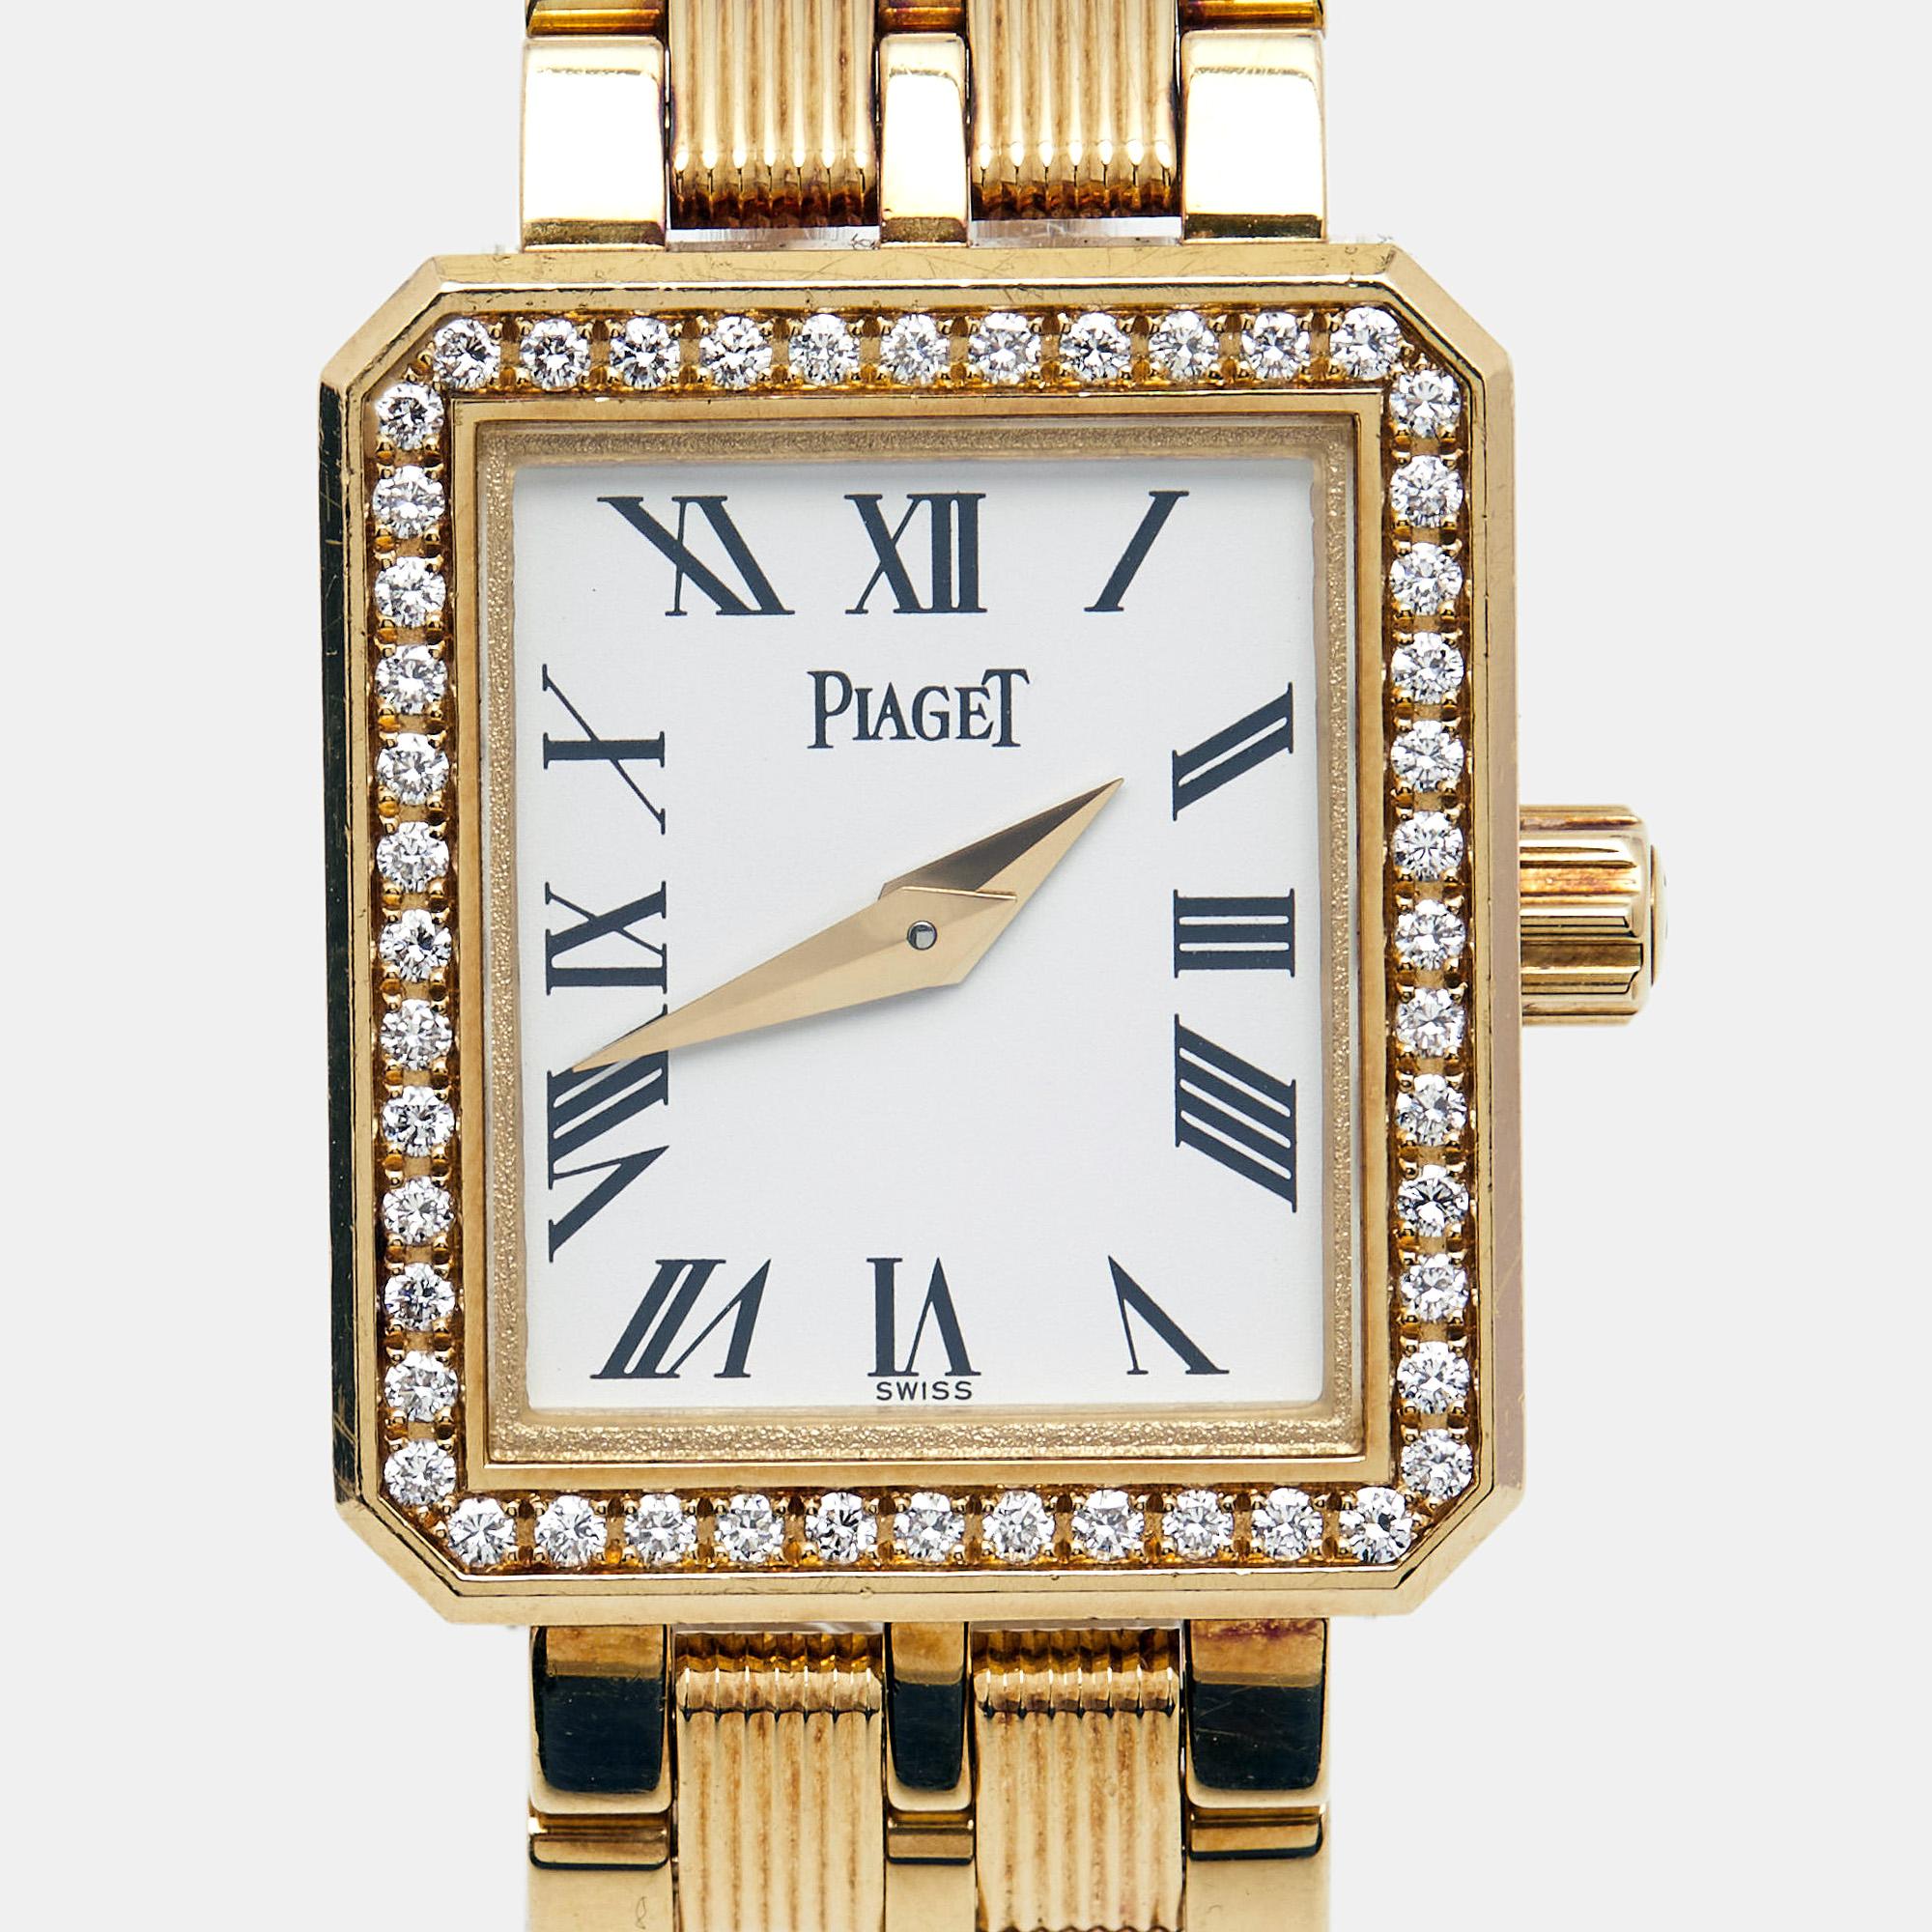 Elegant design, precise craftsmanship, and subtle aesthetics define this exquisite watch from the house of Piaget. The 18k yellow gold bracelet holds an elegant squarish case that features a bezel fitted with carefully placed diamonds all around.